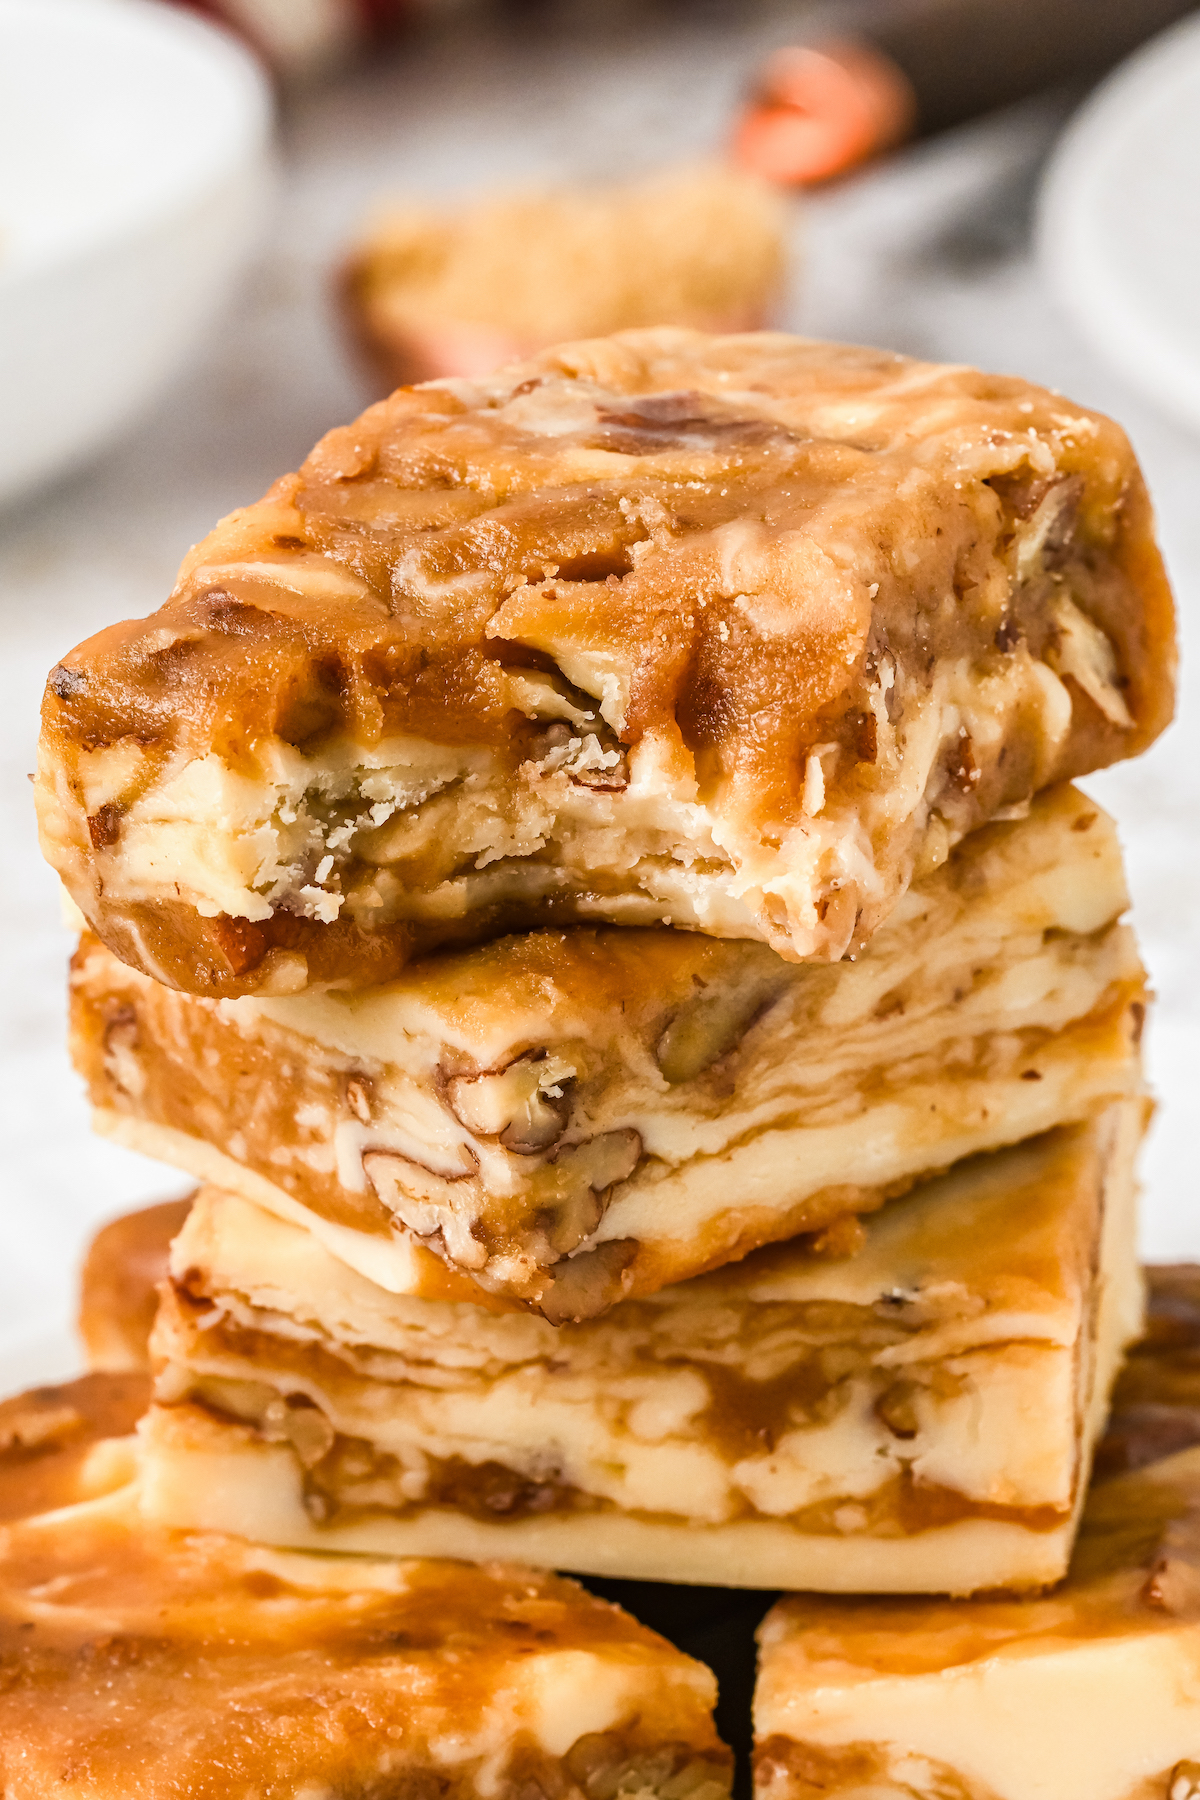 A stack of praline fudge squares, with a bite taken out of the top piece.